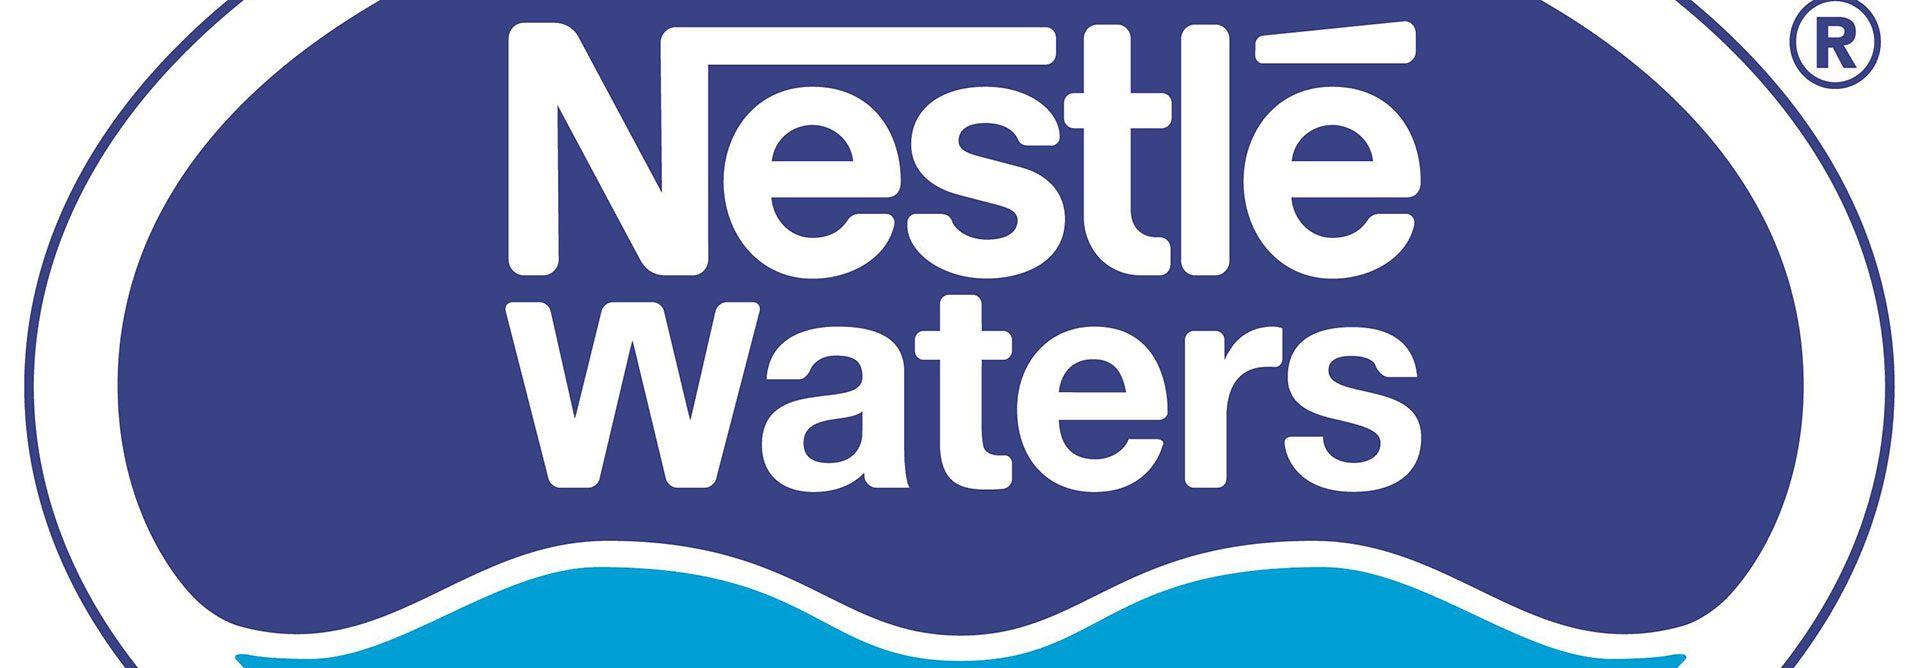 Nestle Waters Logo - New CEO at Nestle Waters North America